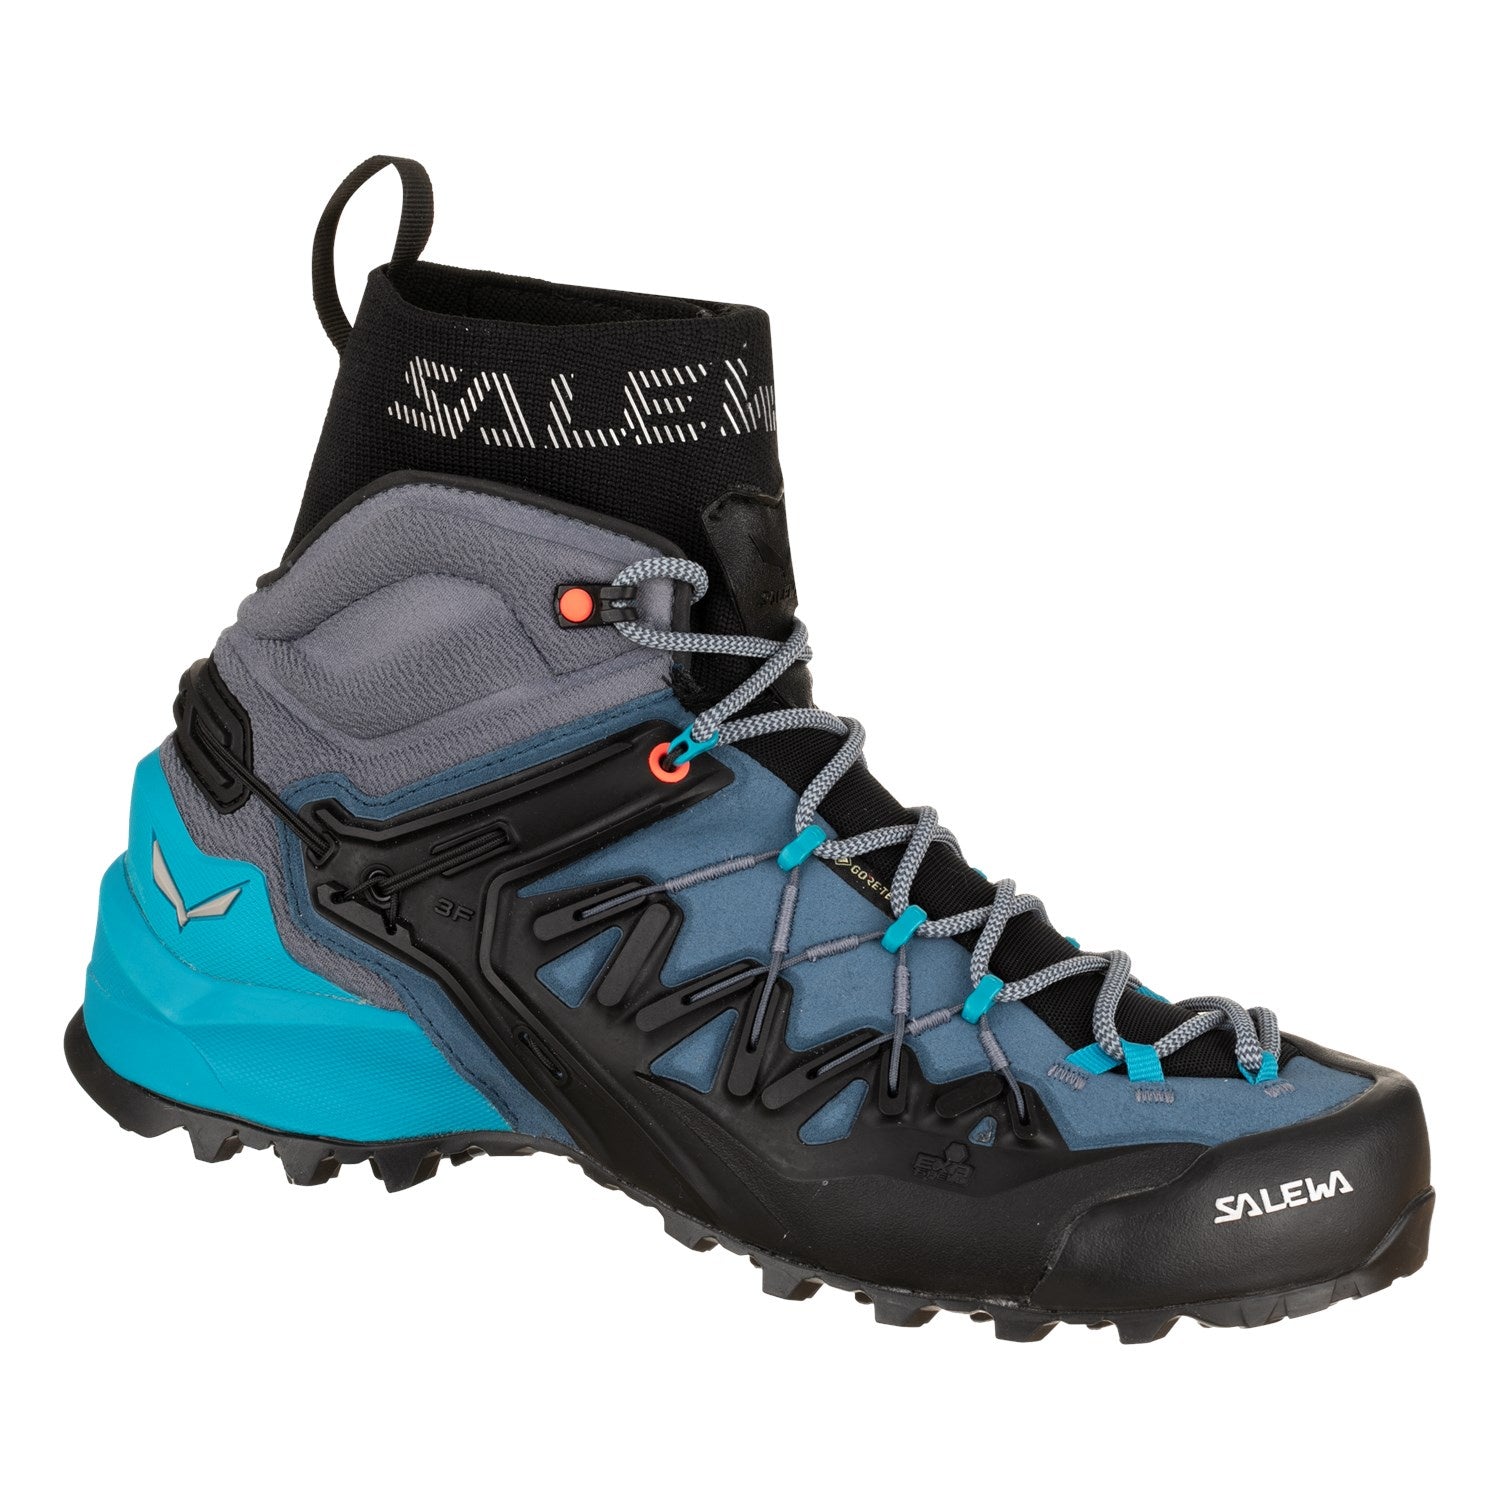 All Products Tagged Shoes - VertigoGear